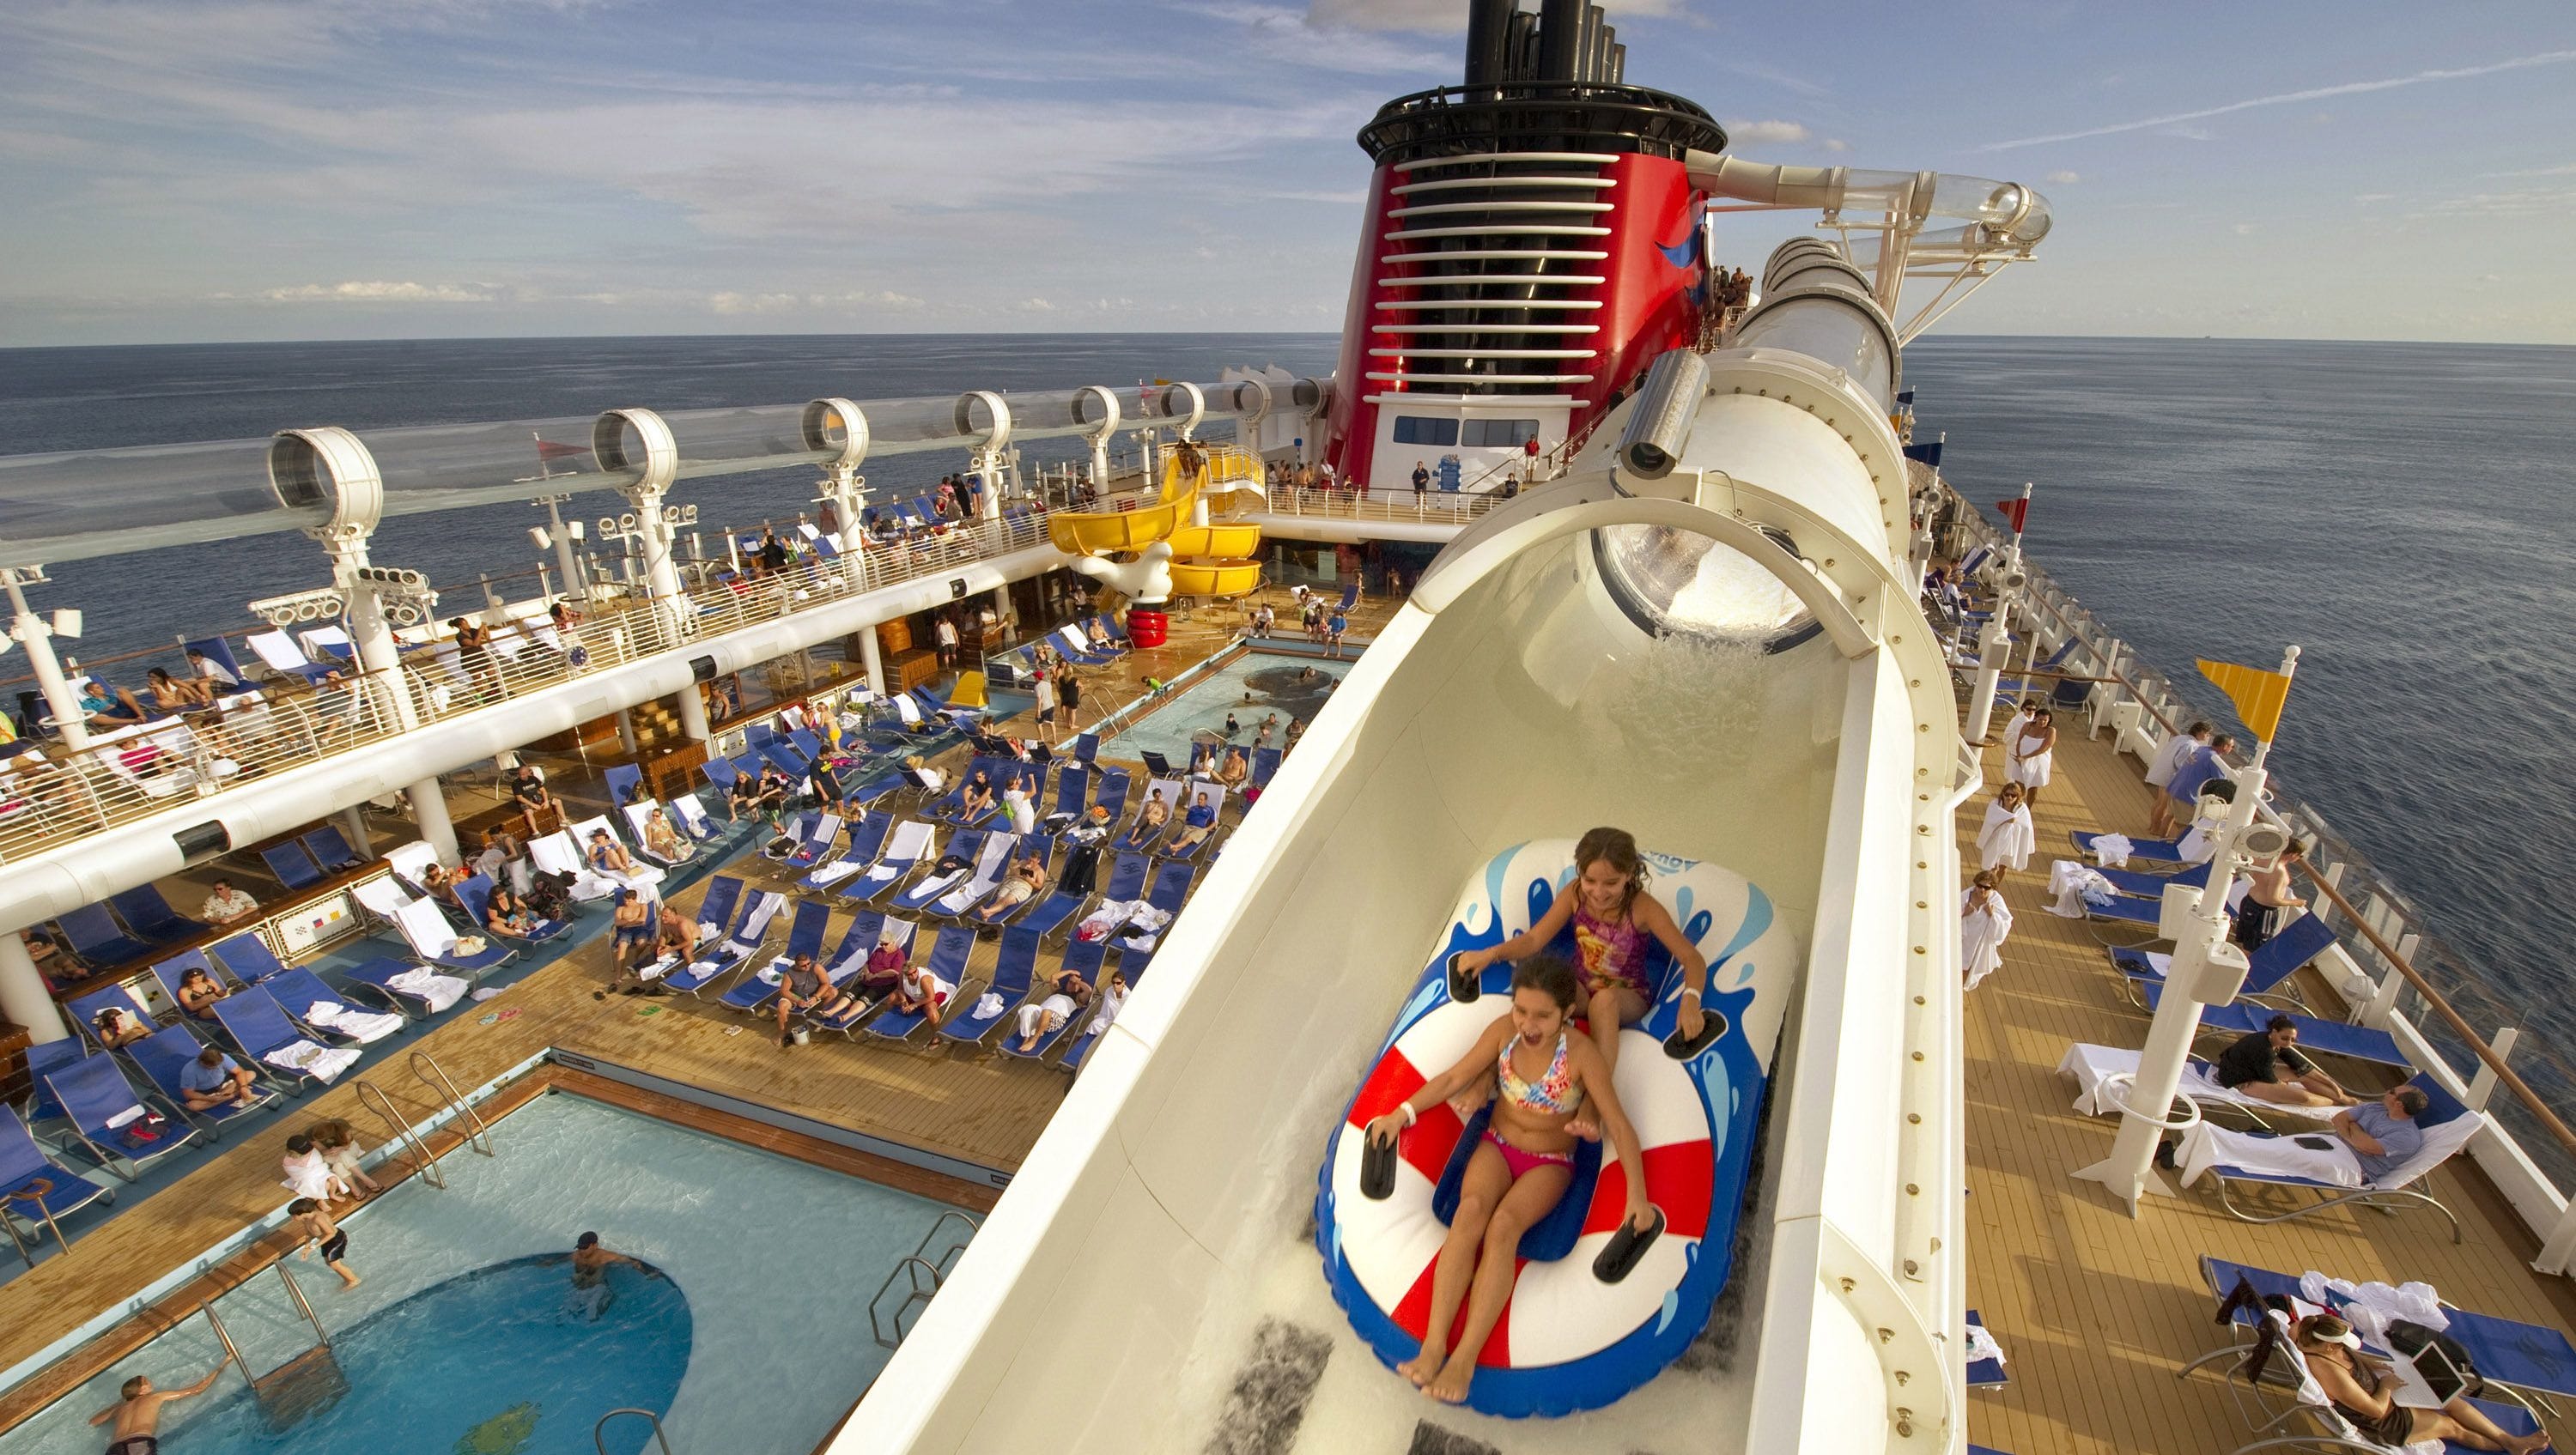 The best cruise ship for families? It just might be one of these two